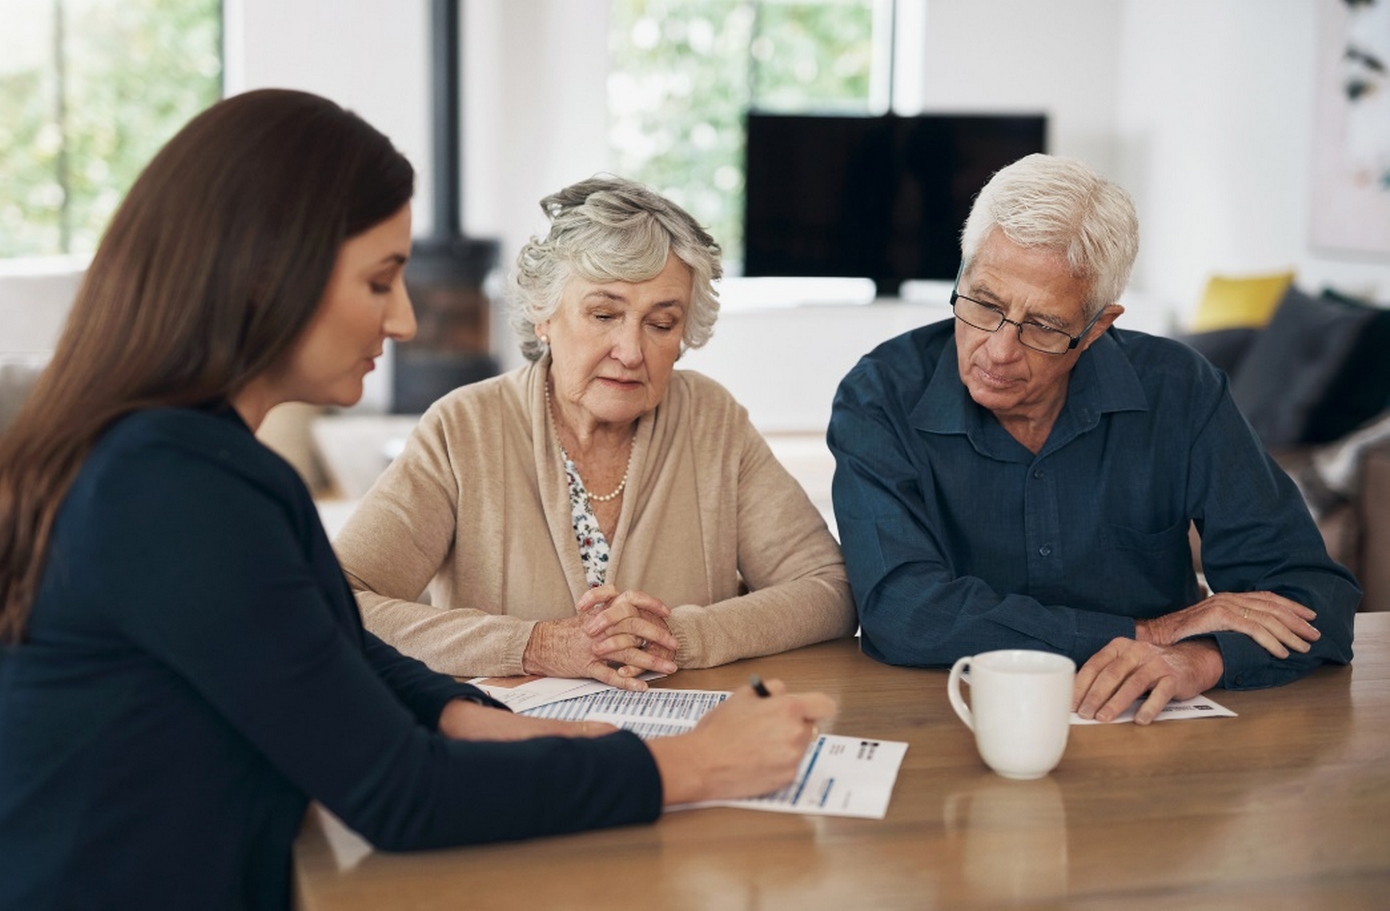 Broker discussing documents with an elderly couple.